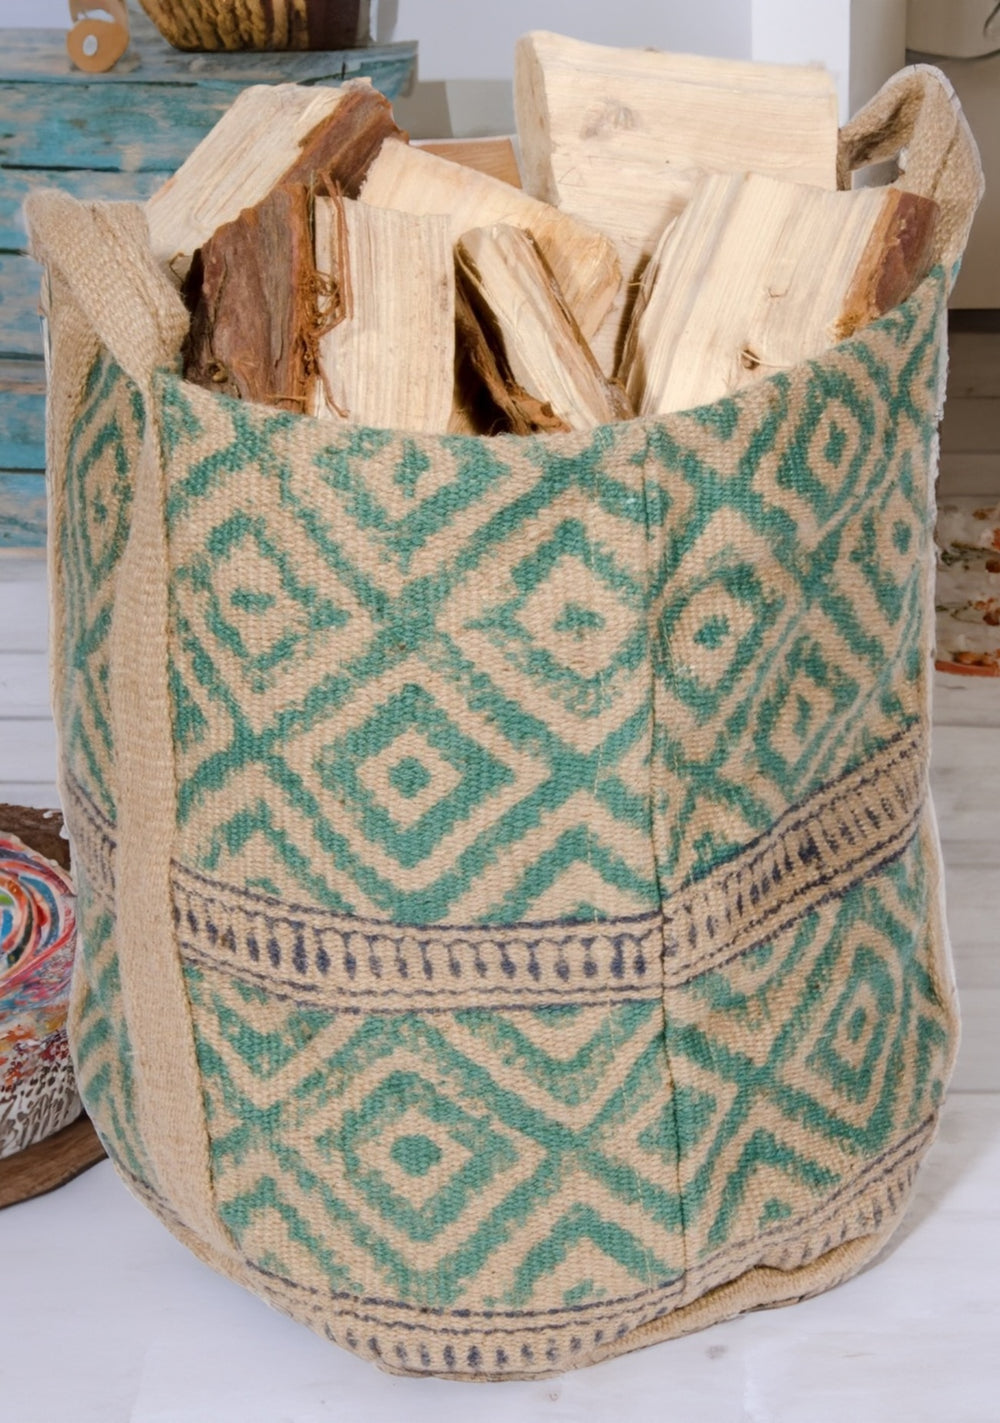 Turquoise Log Bag Second Nature Online